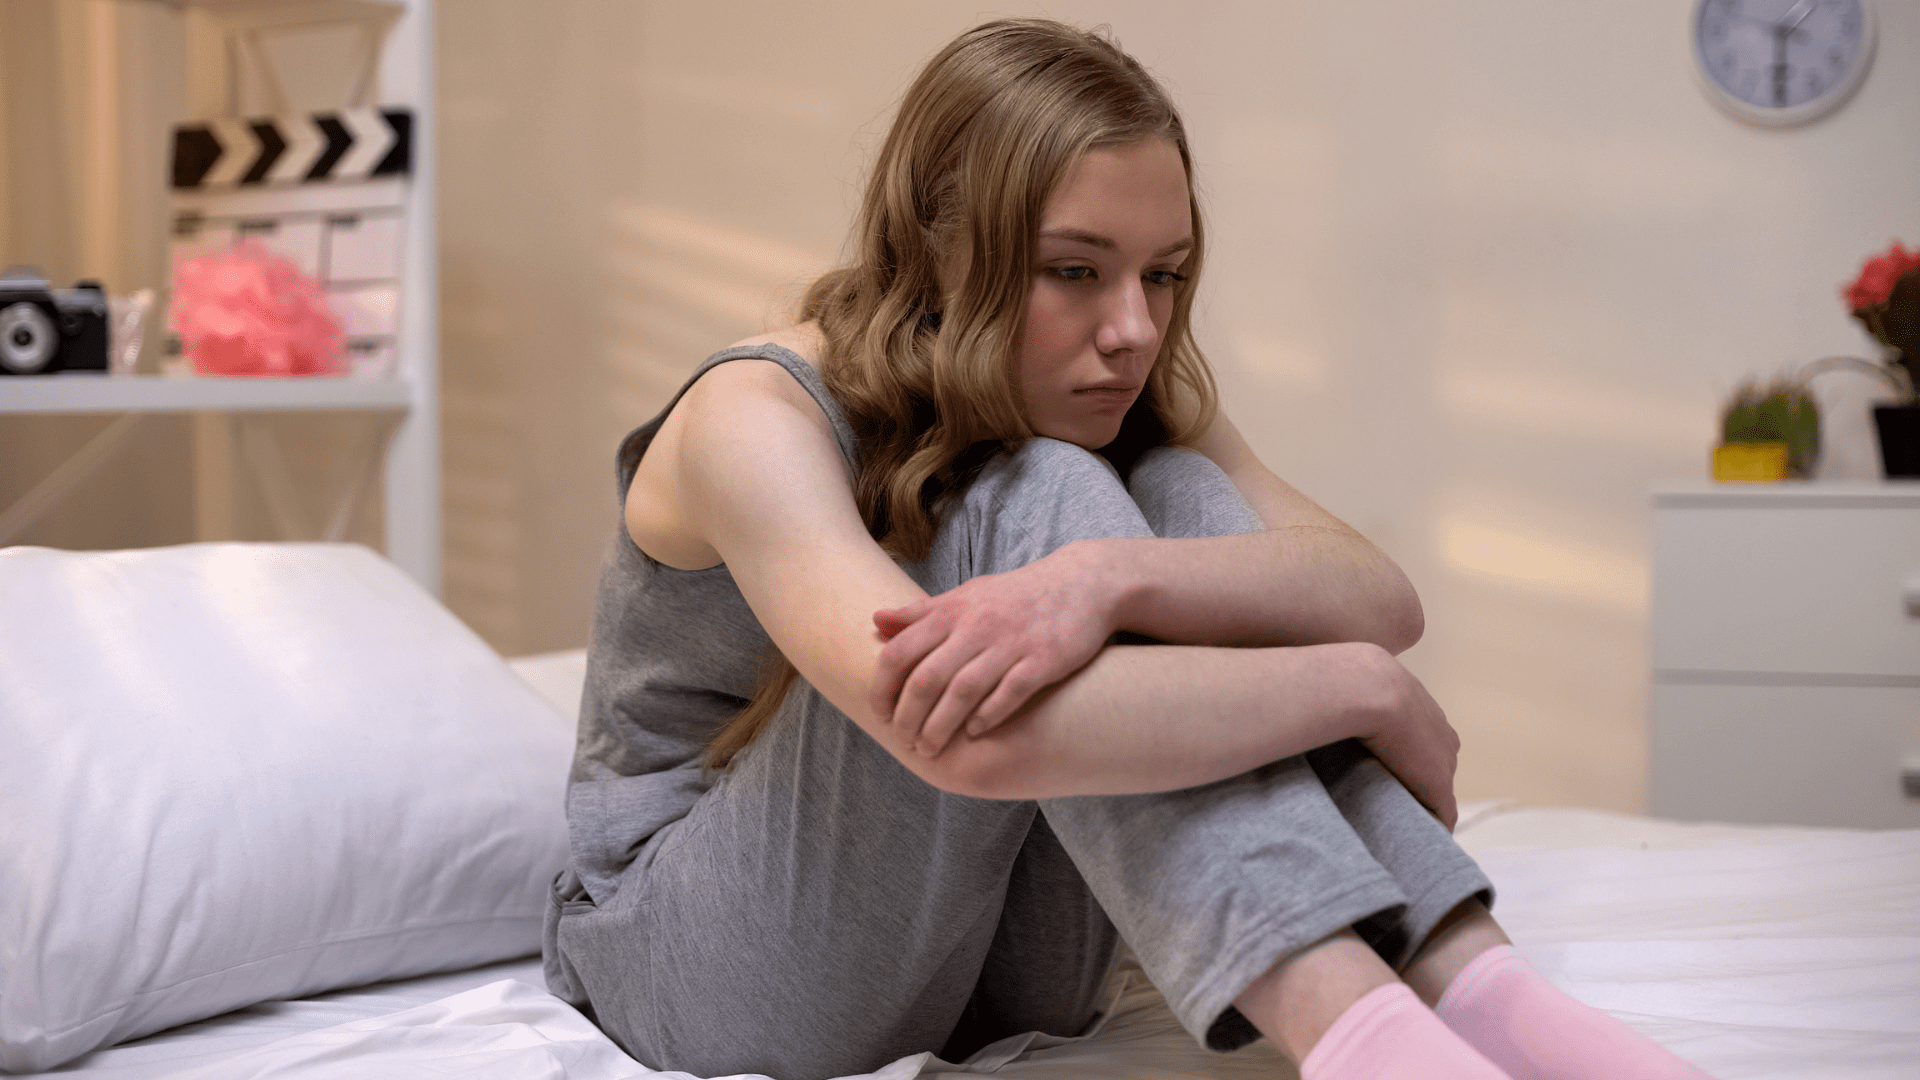 Image of a young woman sitting on her bed, holding her head in her hands, expressing symptoms of anxiety. This image relates to the topic of anxiety and the benefits of brain-based coaching and neuroplasticity in managing anxiety.